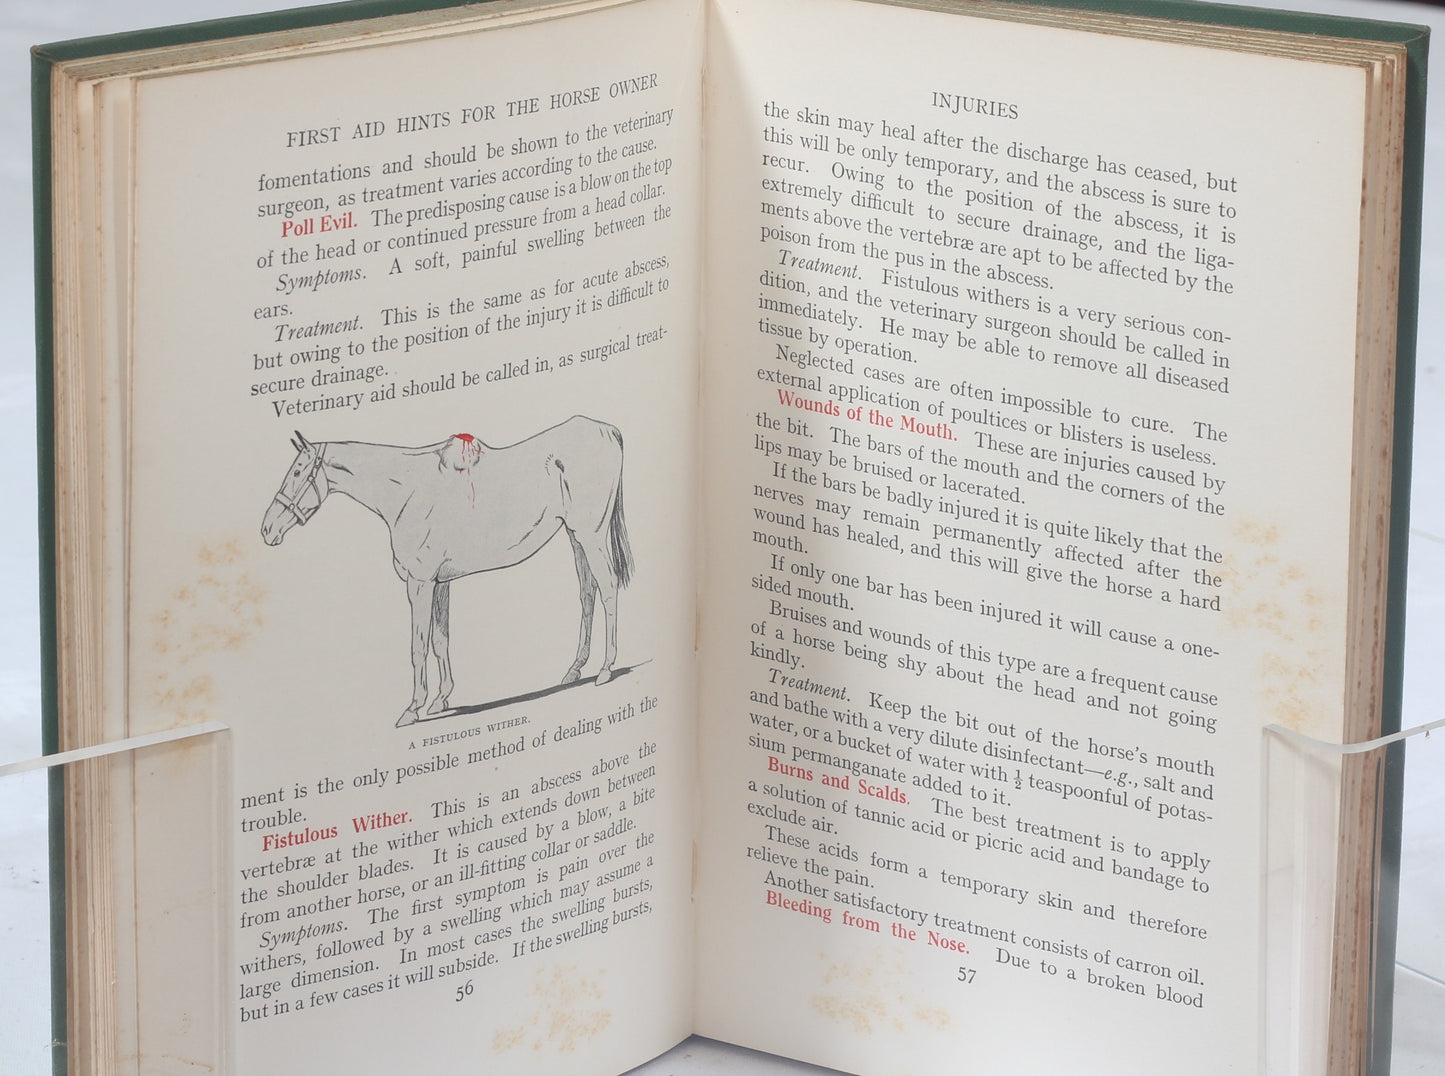 First Aid Hints for the Horse Owner, A Veterinary Note Book by Major W.E.Lyon, 1st Ed 1933